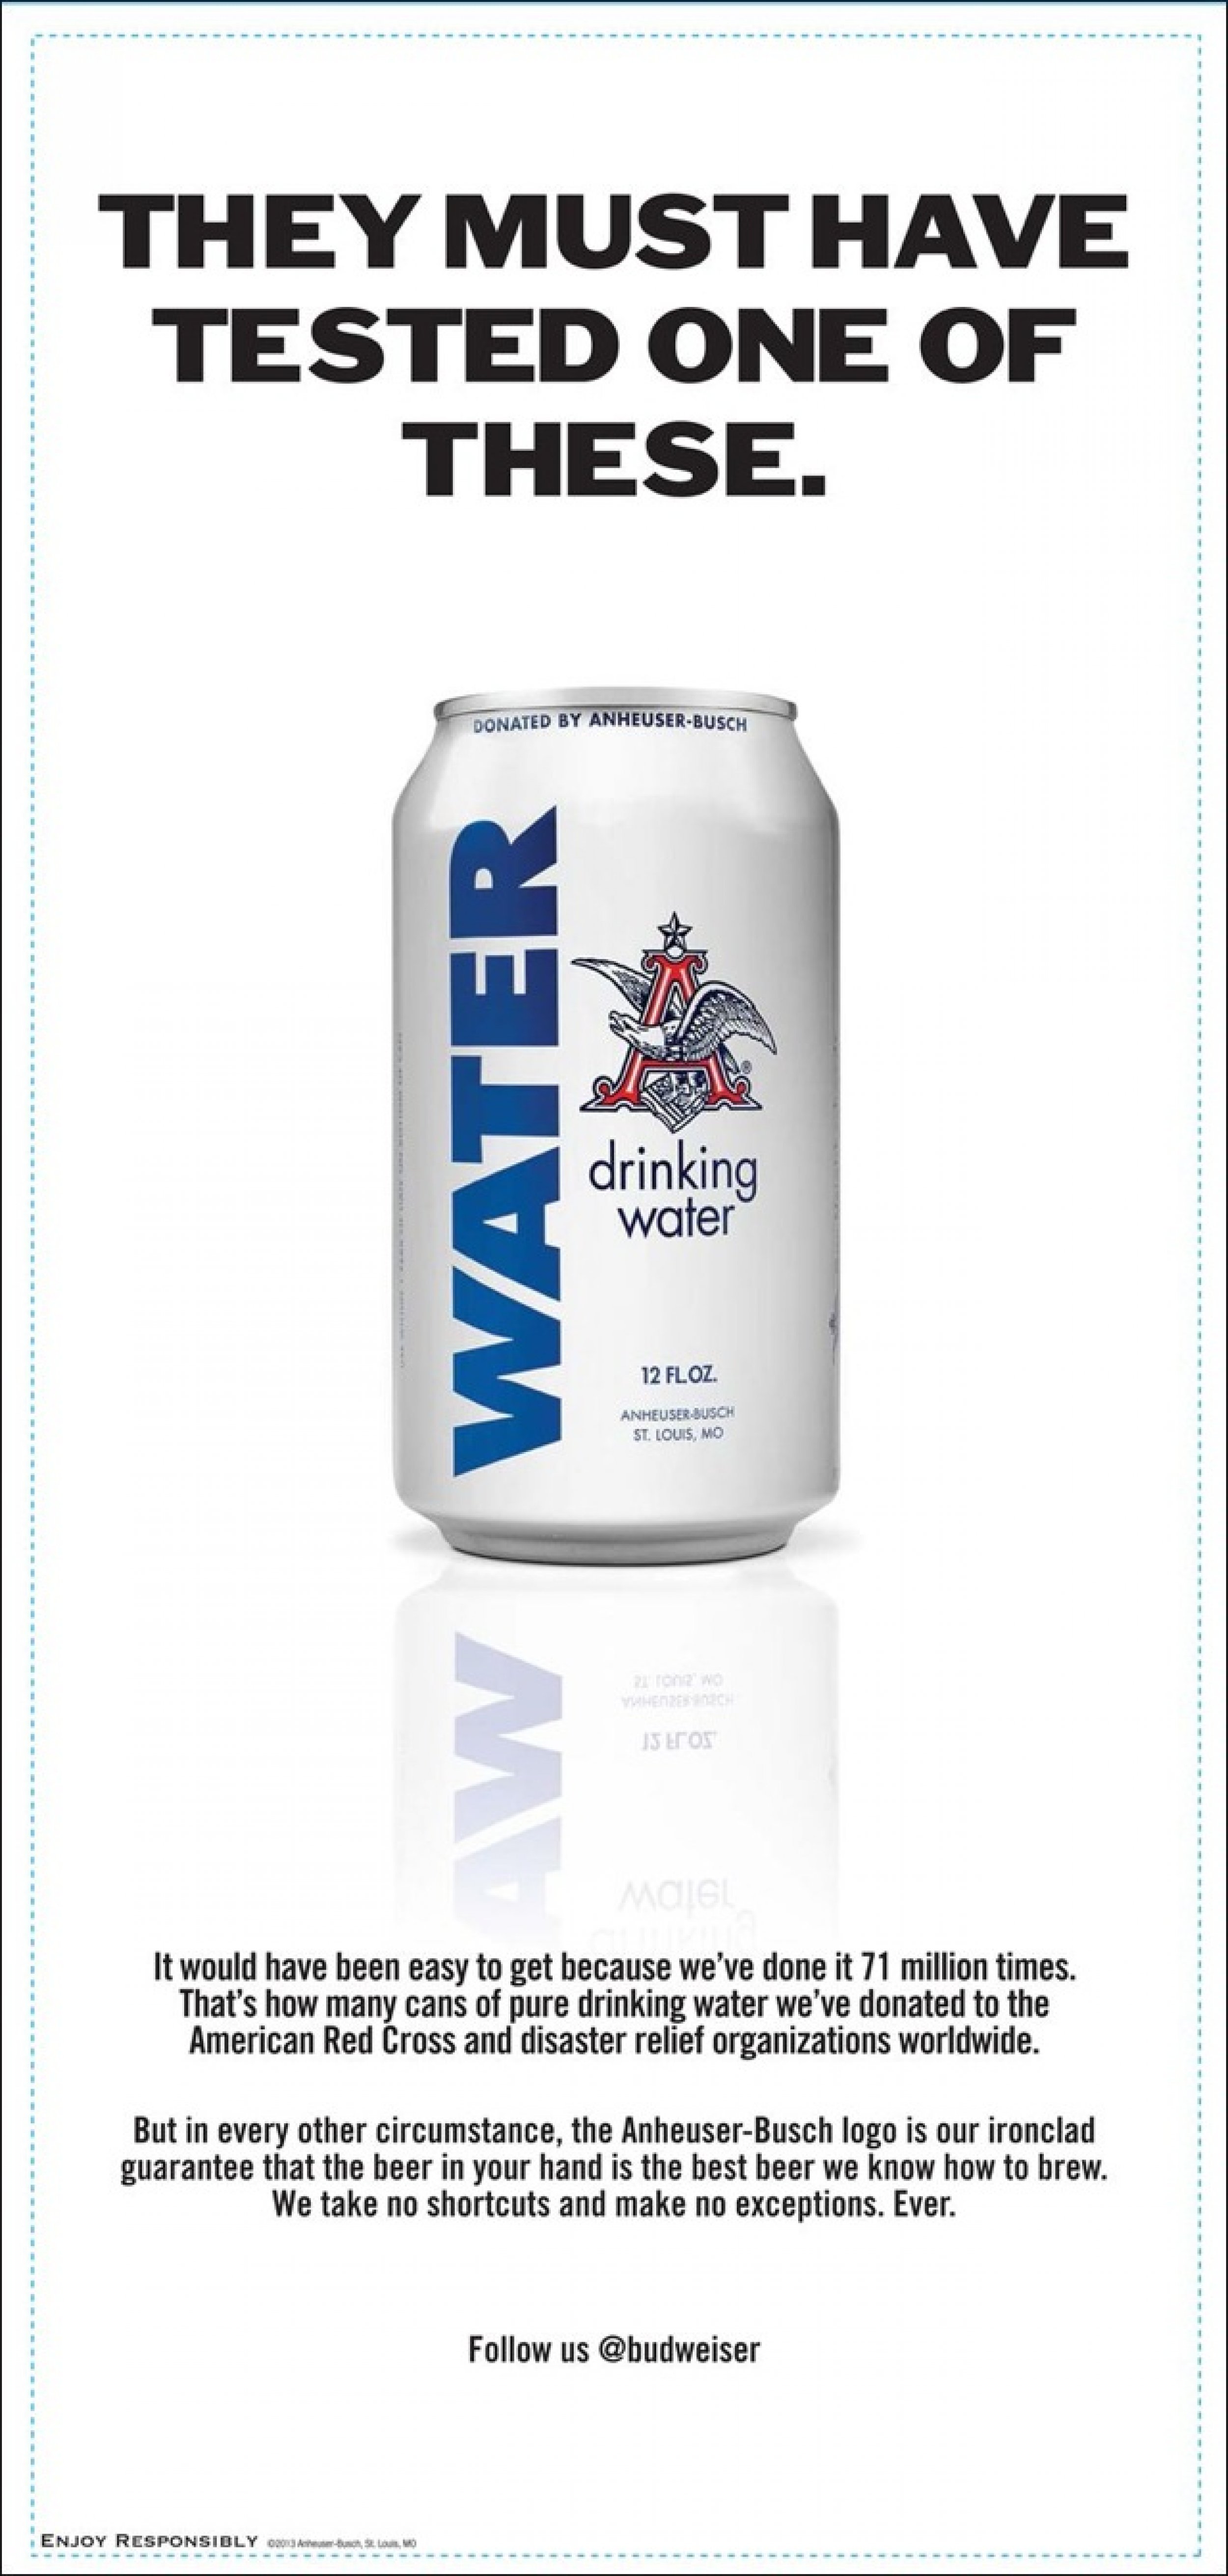 New AnheuserBusch Ad Fires Back At 'Watered Down' Lawsuit [PHOTO